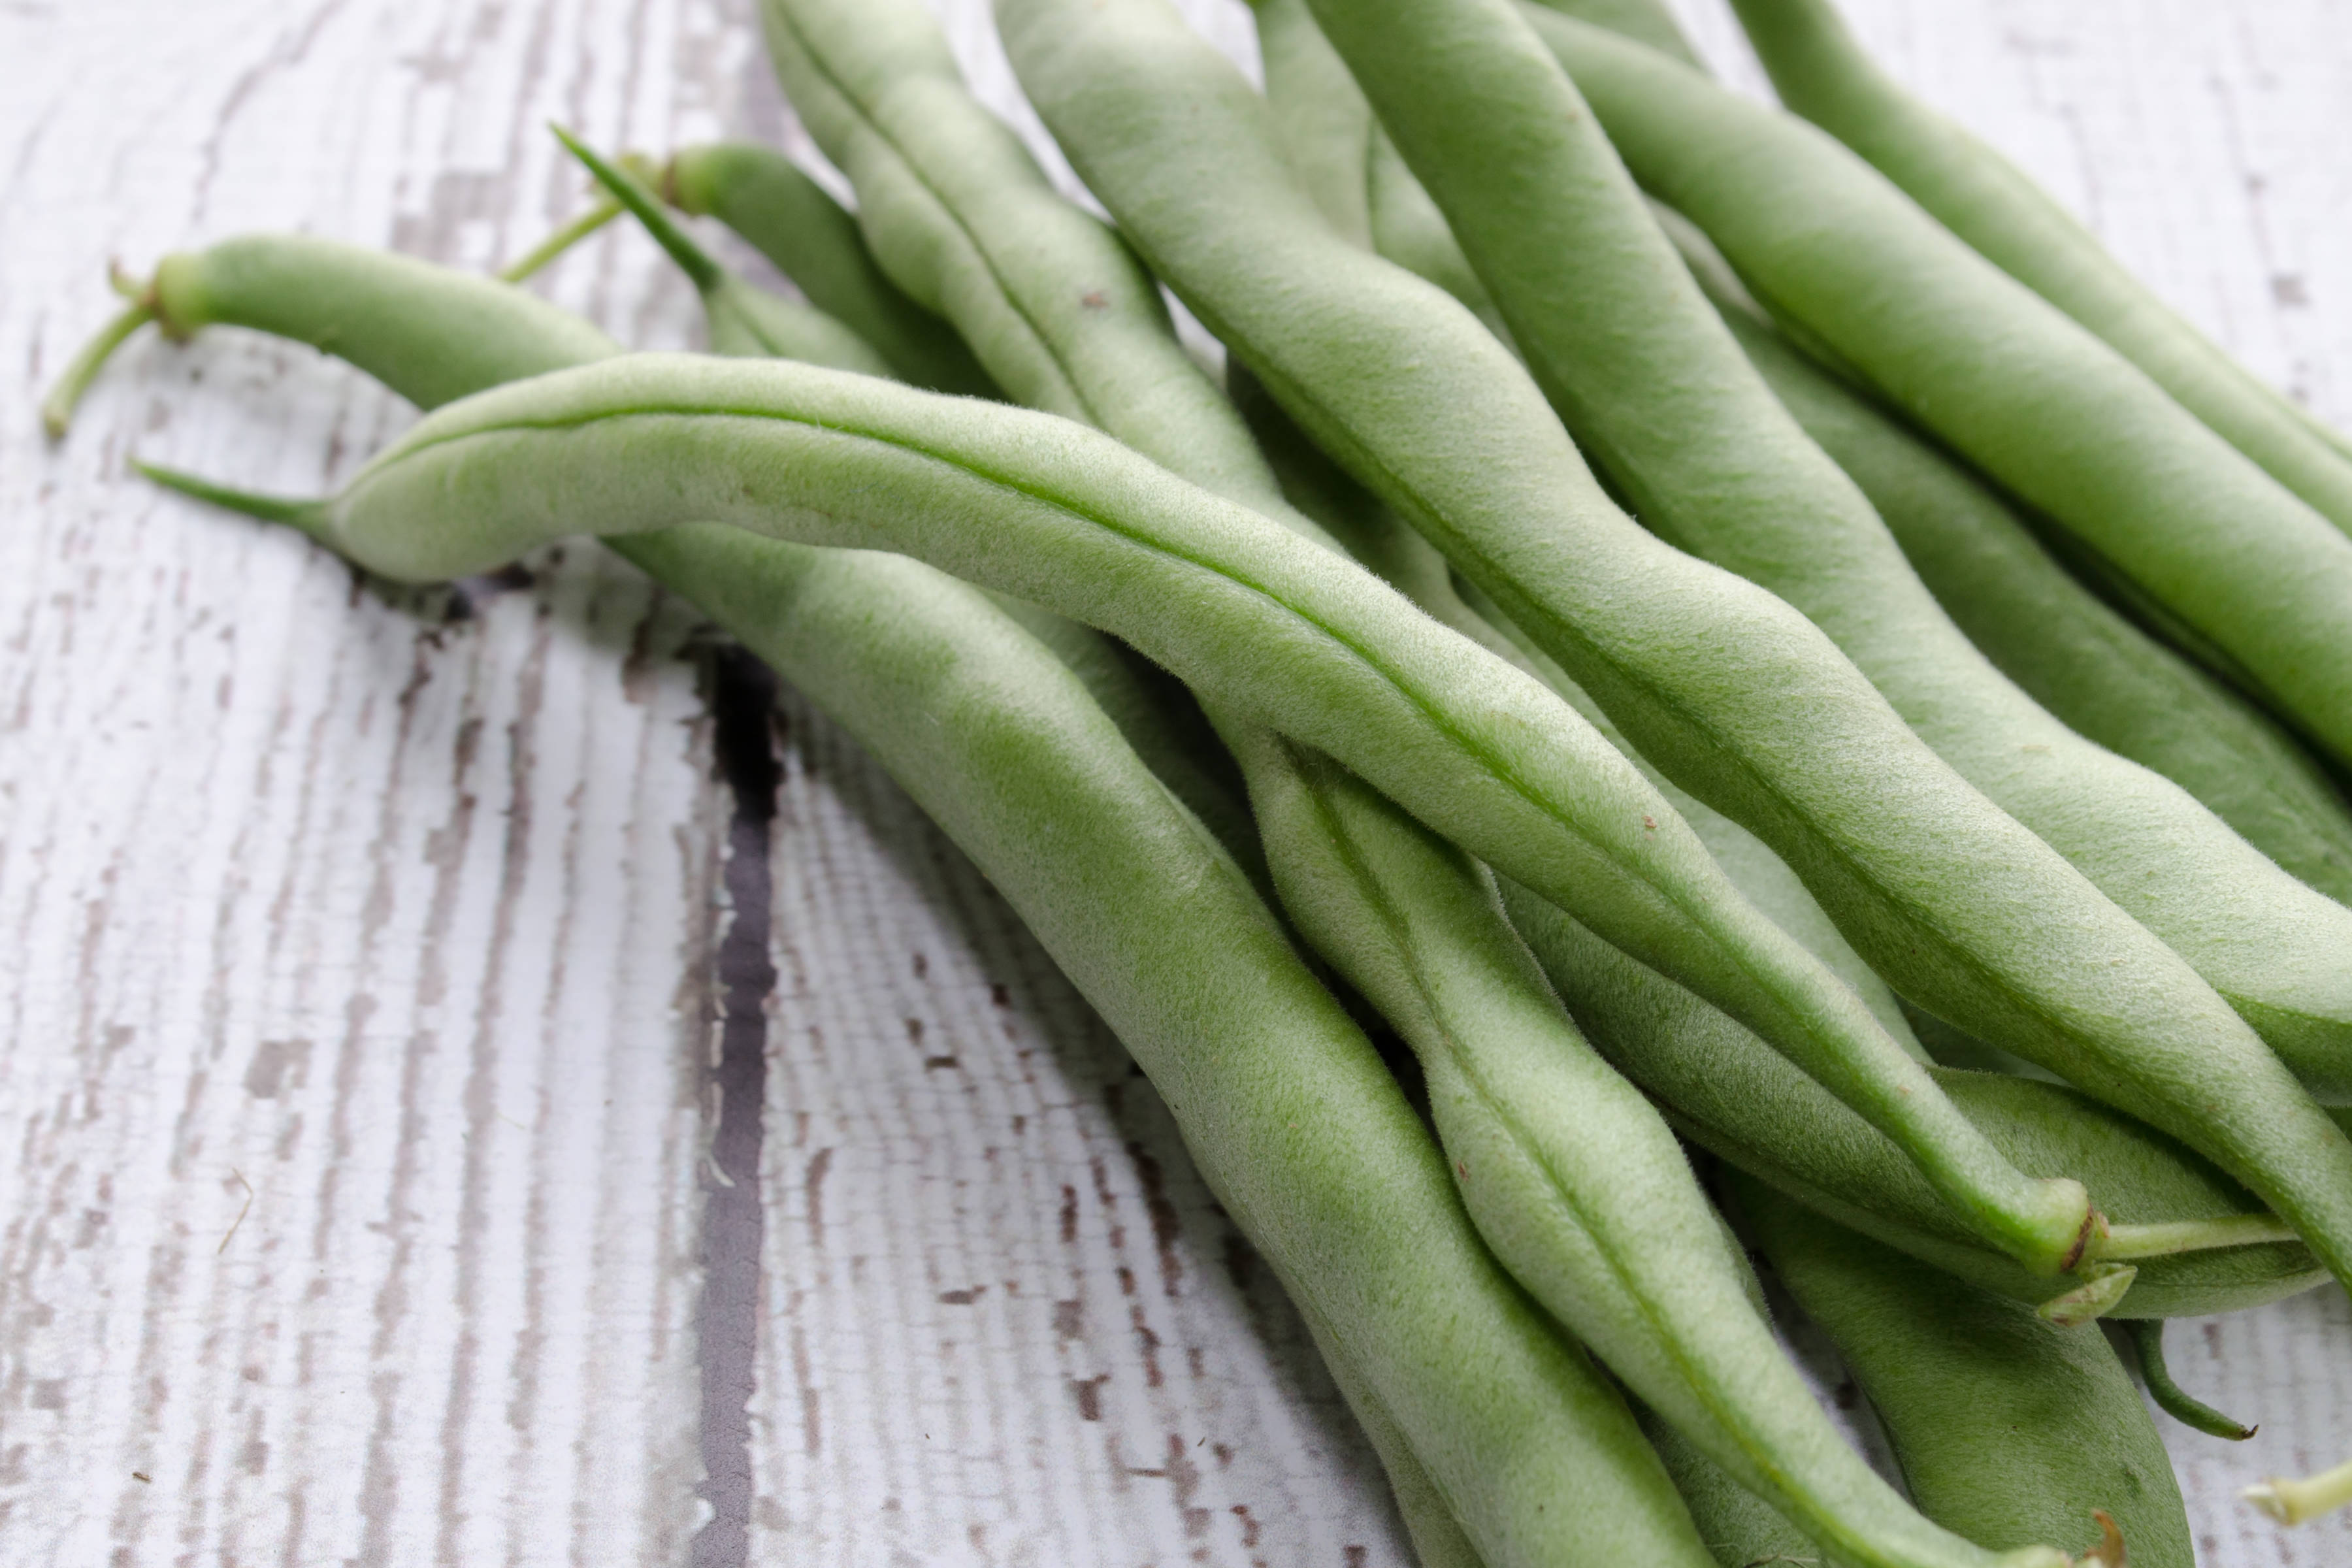 Stack of green beans on a wooden board. Photo: Linda Hall / iStock.